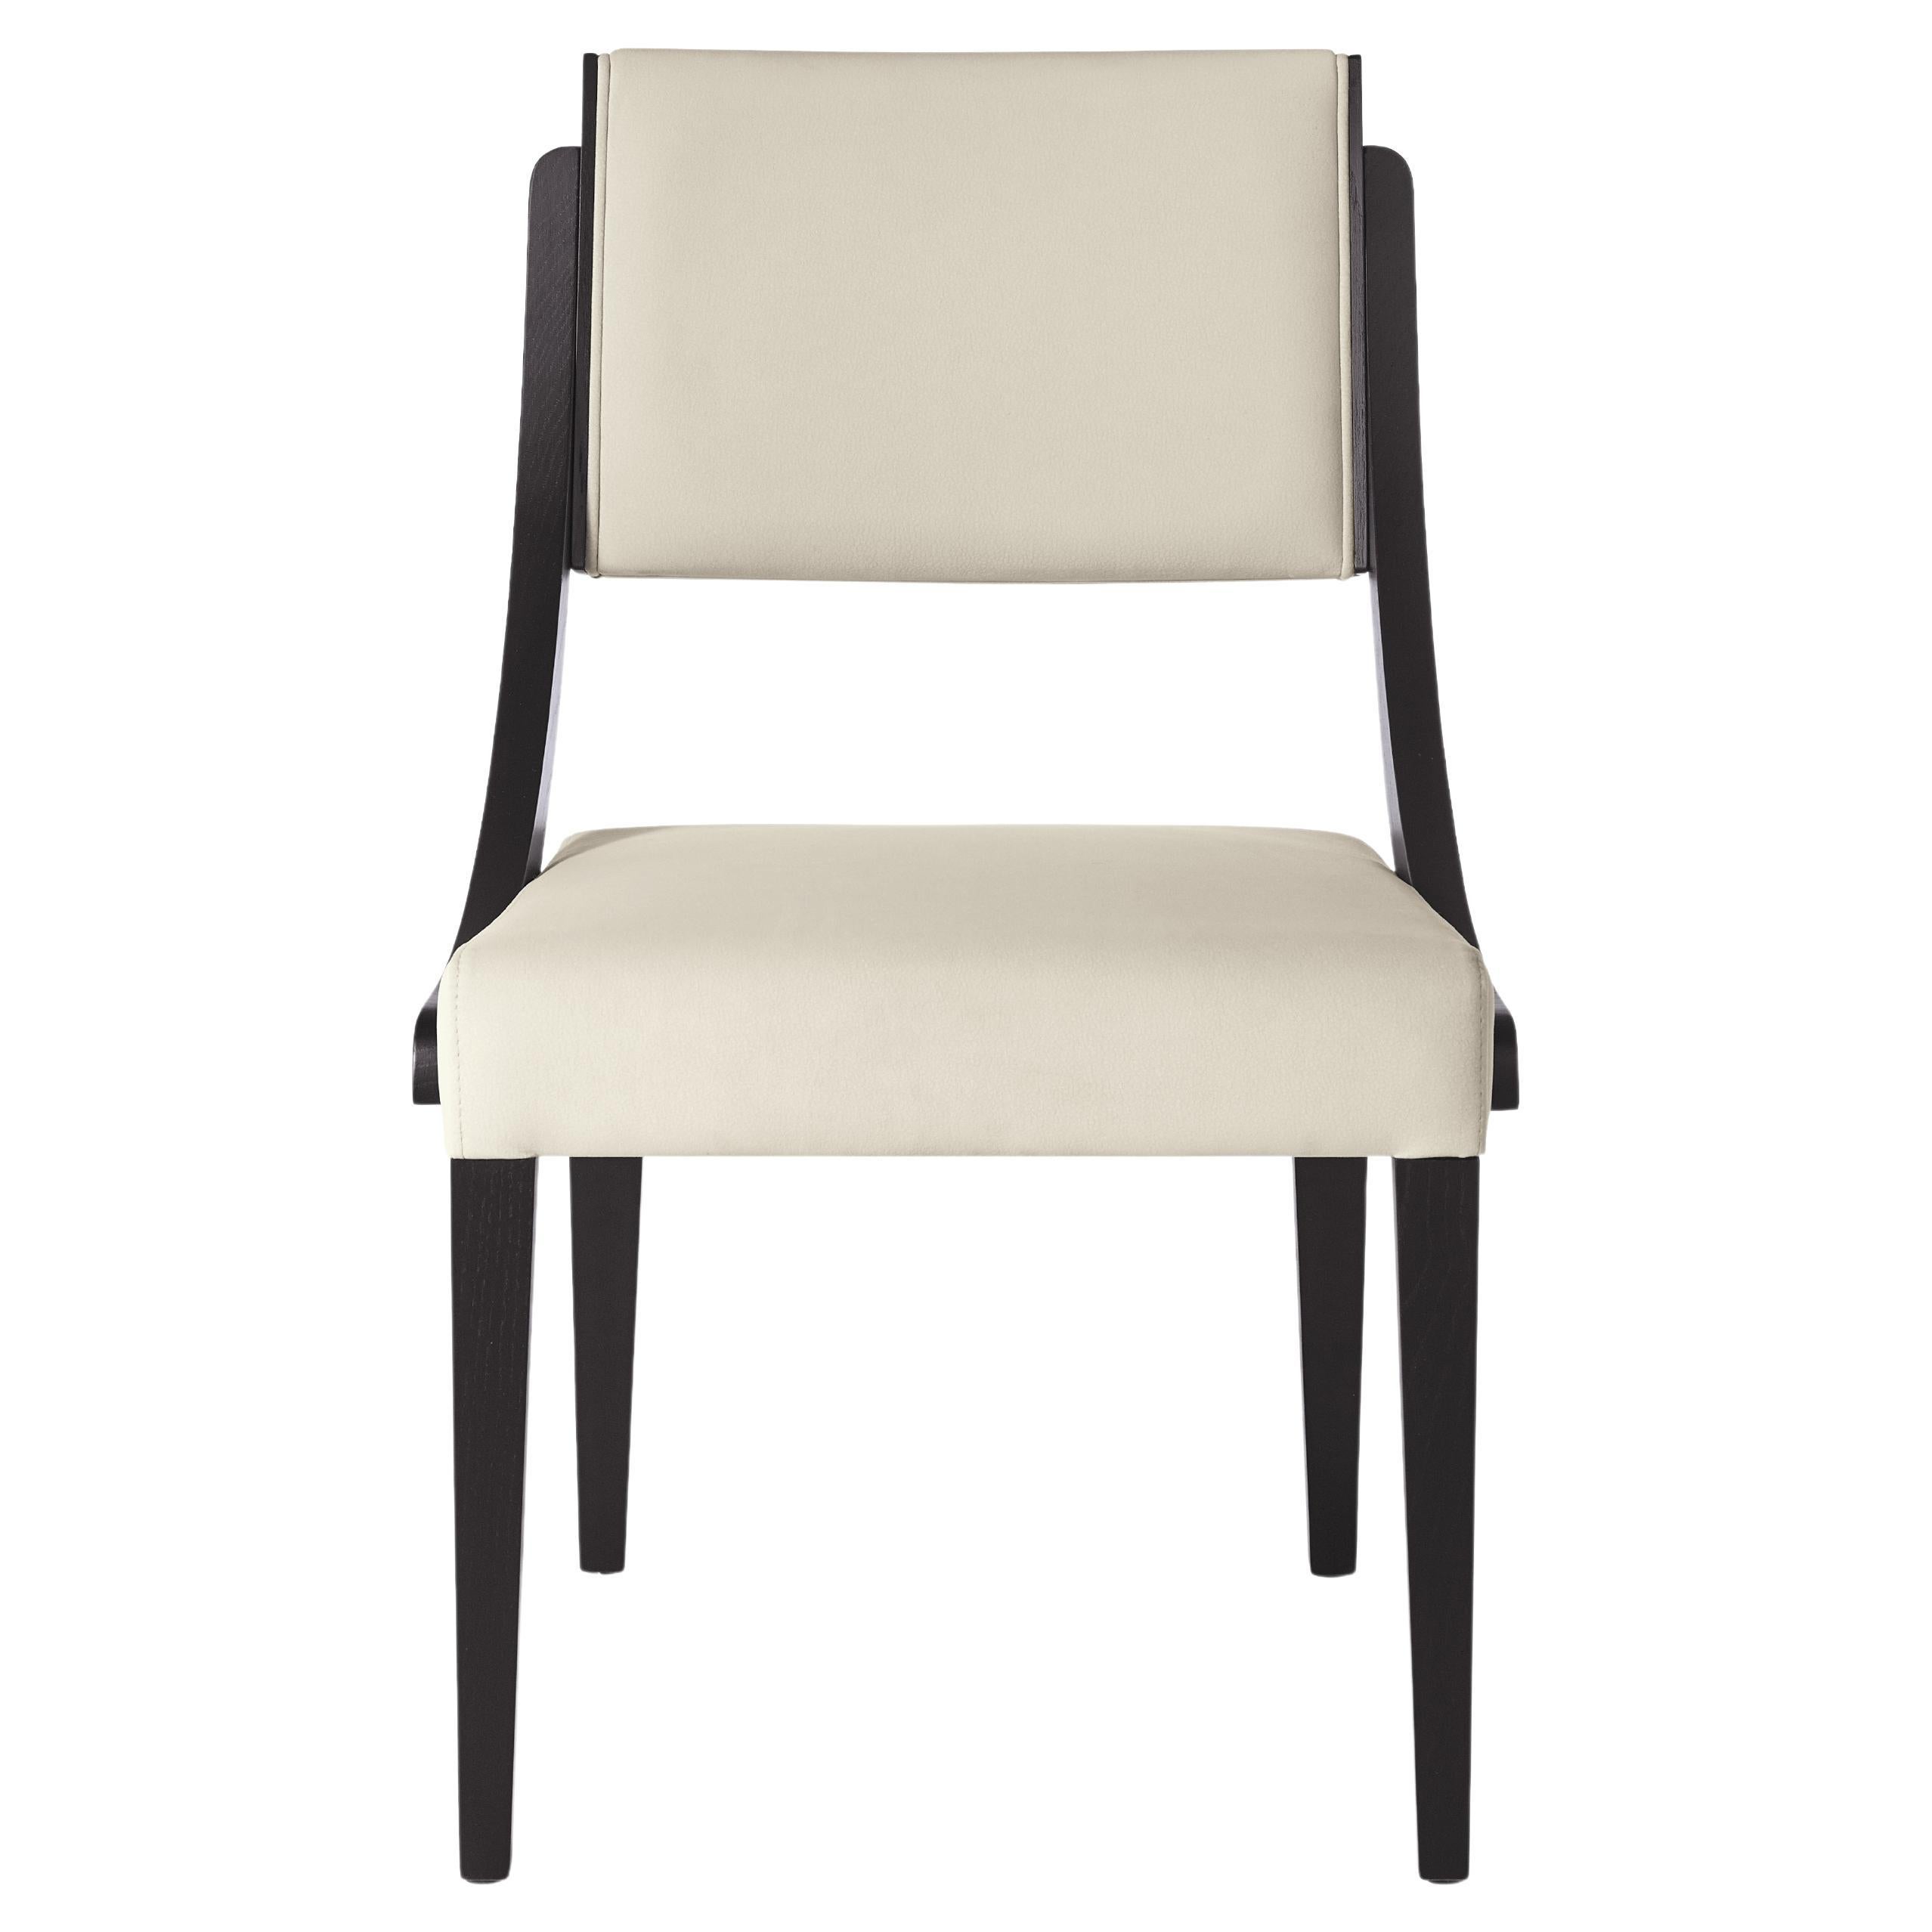 The minimalistic design of the chair brings a sense of sophistication while maintaining comfort. Constructed of black oak frame and upholstered in high quality cream leather.
Available in COM.
“Minimum order of 4 chairs.”
Contact us to enquire about